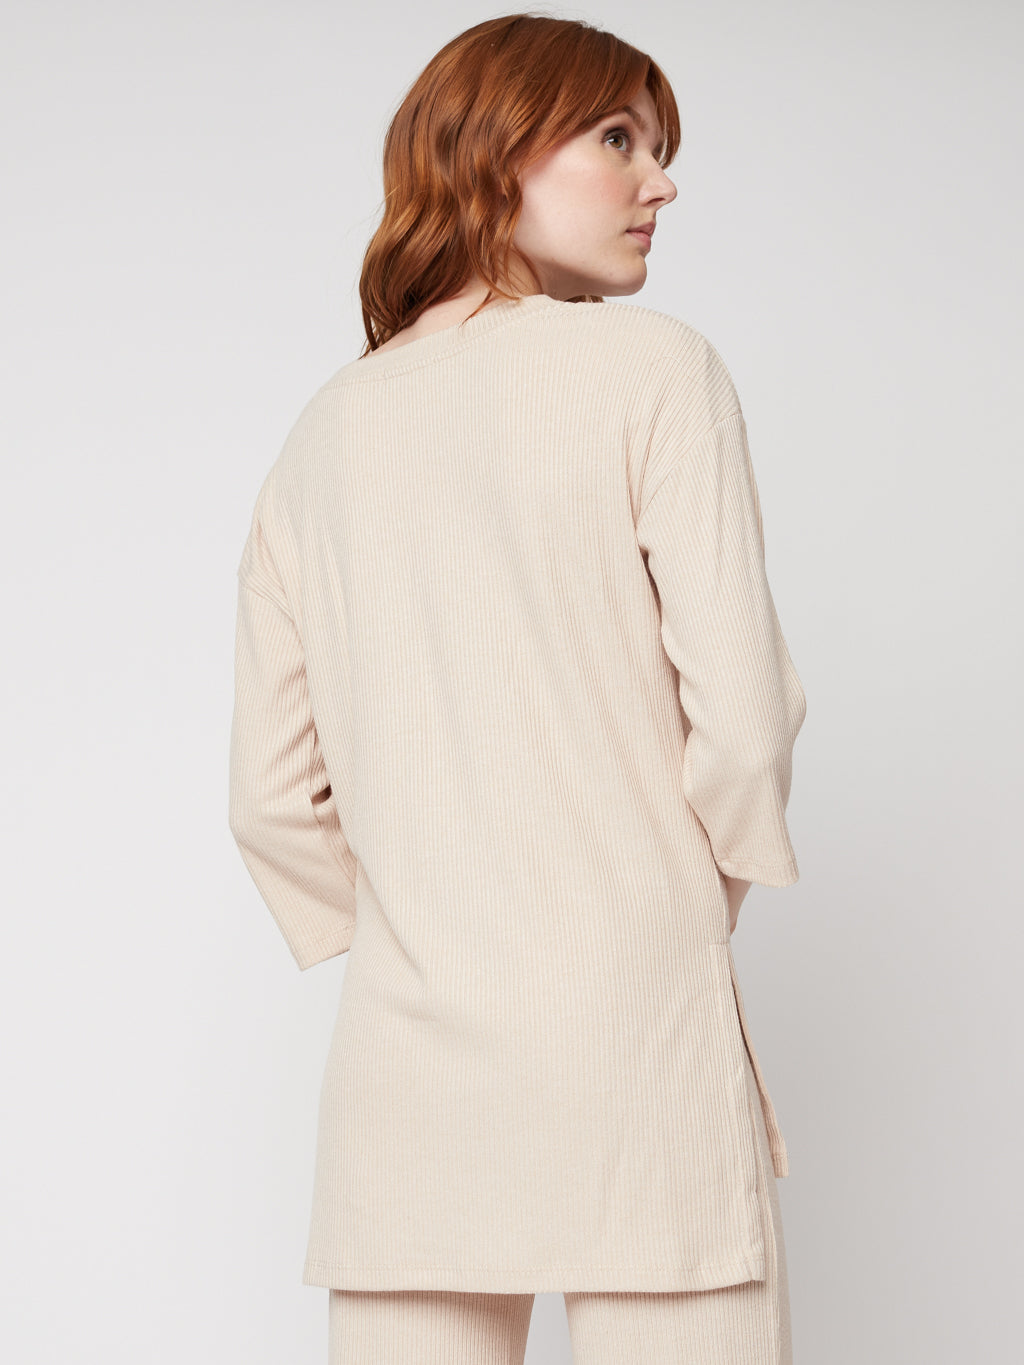 Long-sleevesemi-fitted knit tunic